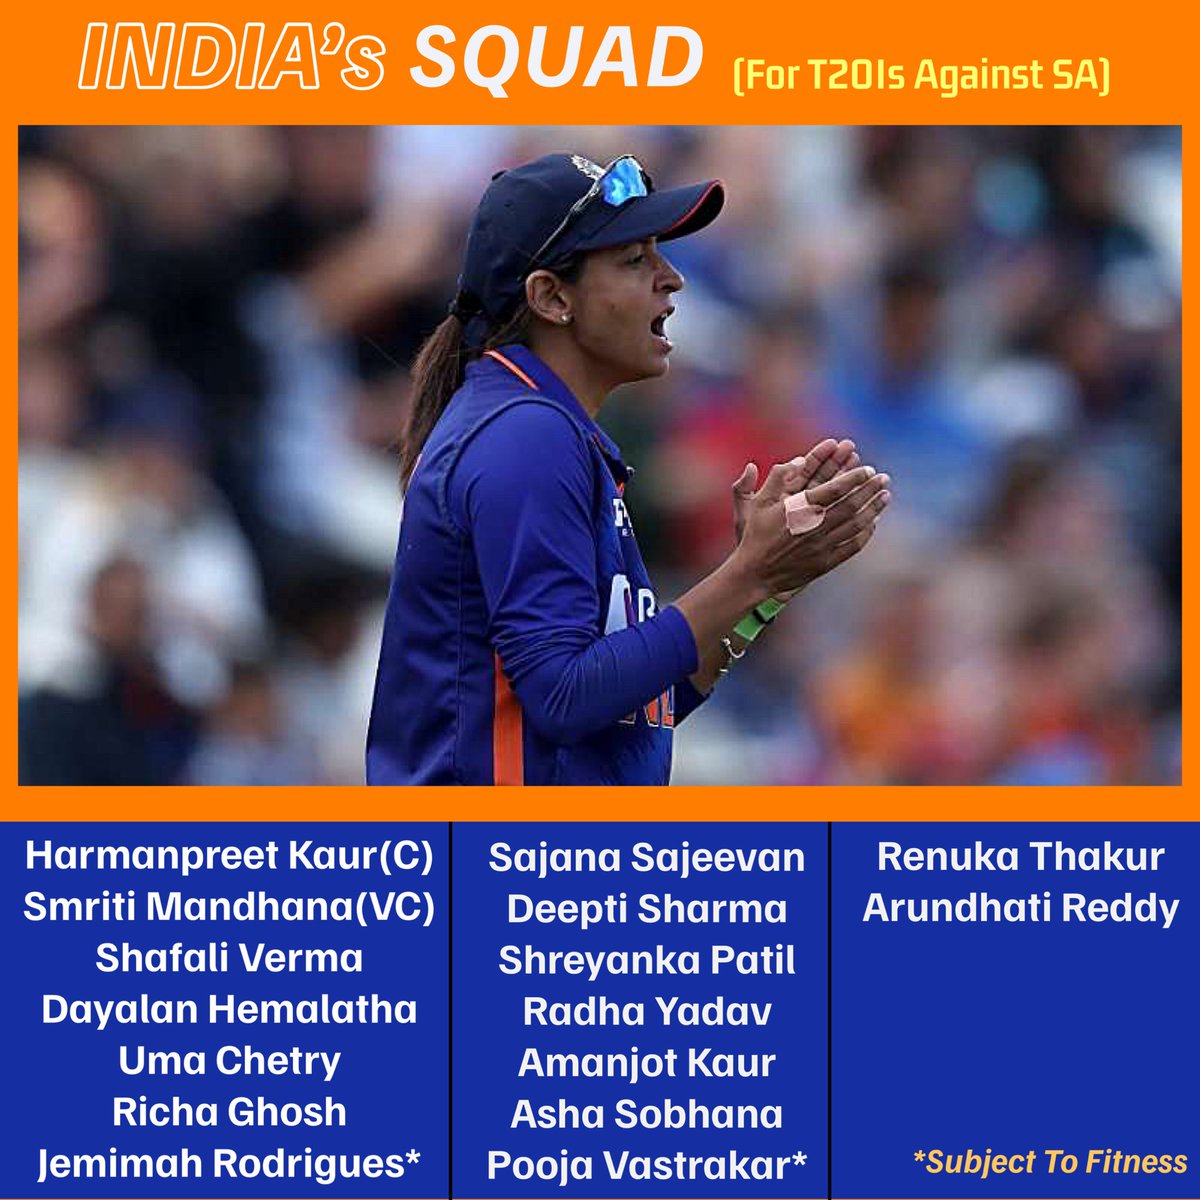 India’s T20I squad for the series against South Africa 🇮🇳 🇿🇦 

@BCCIWomen #HarmanpreetKaur #IndianCricketTeam #CricketTwitter